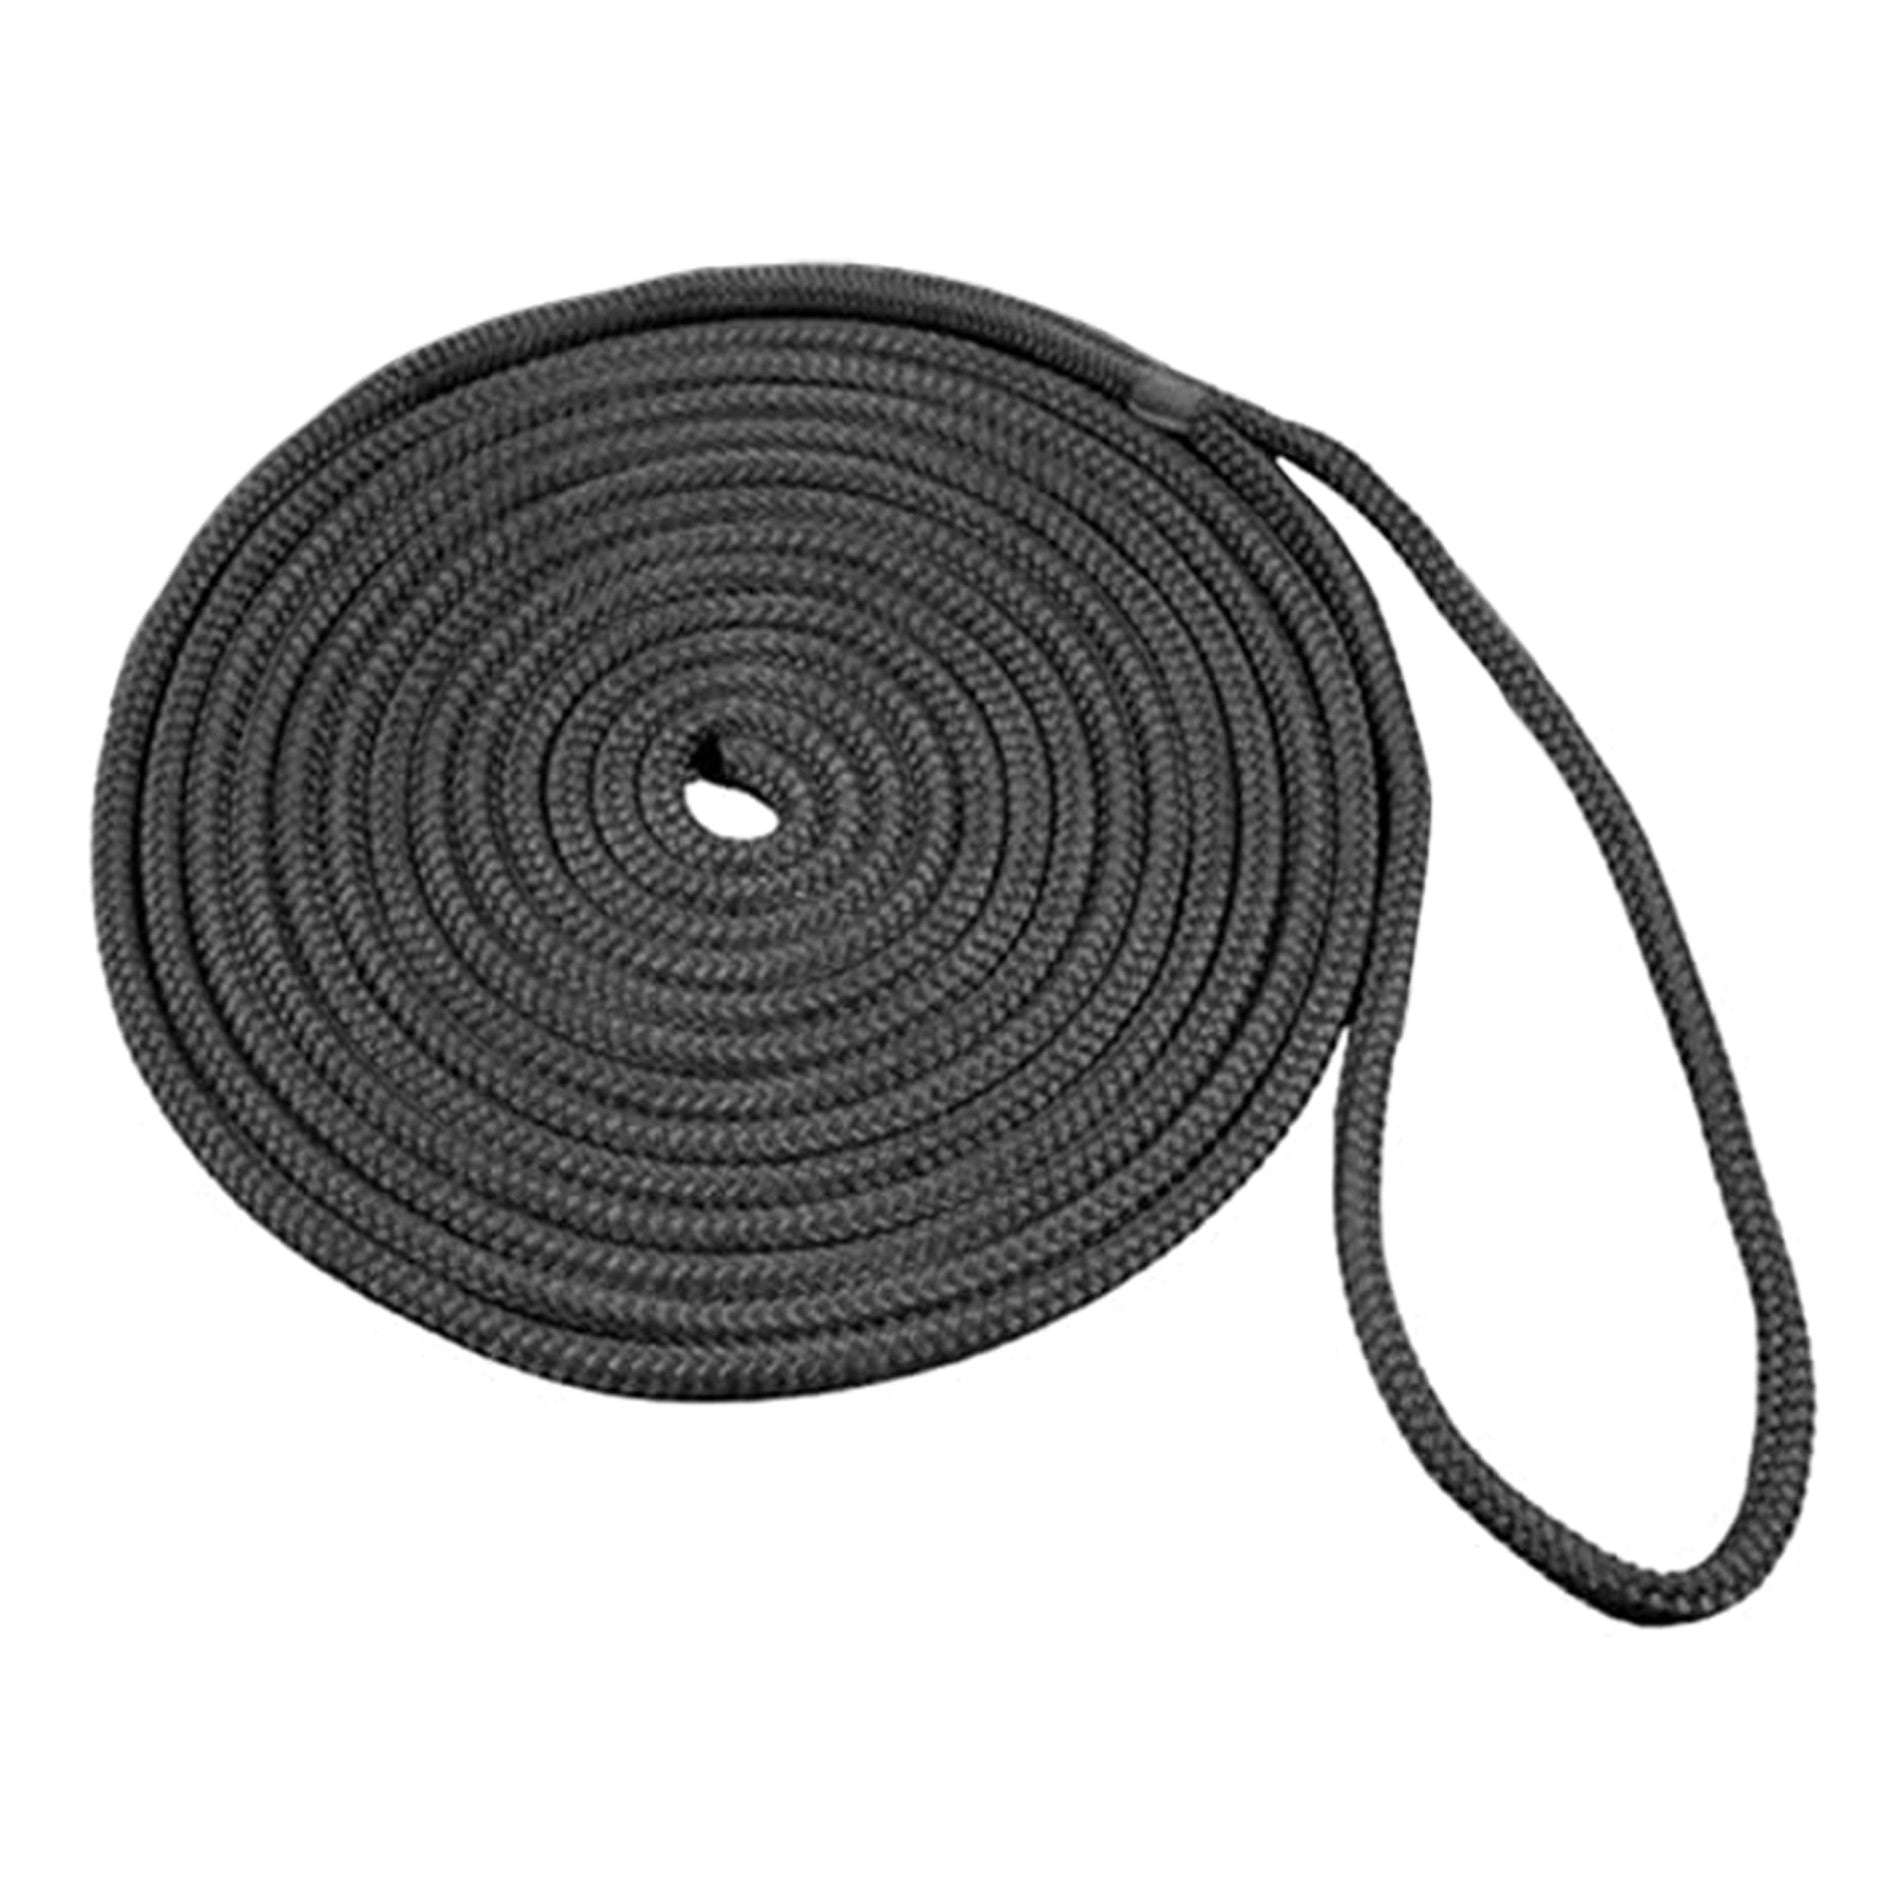 1/2 X 15' Double-Braided Nylon Dock Lines, Blue, 2 Pack